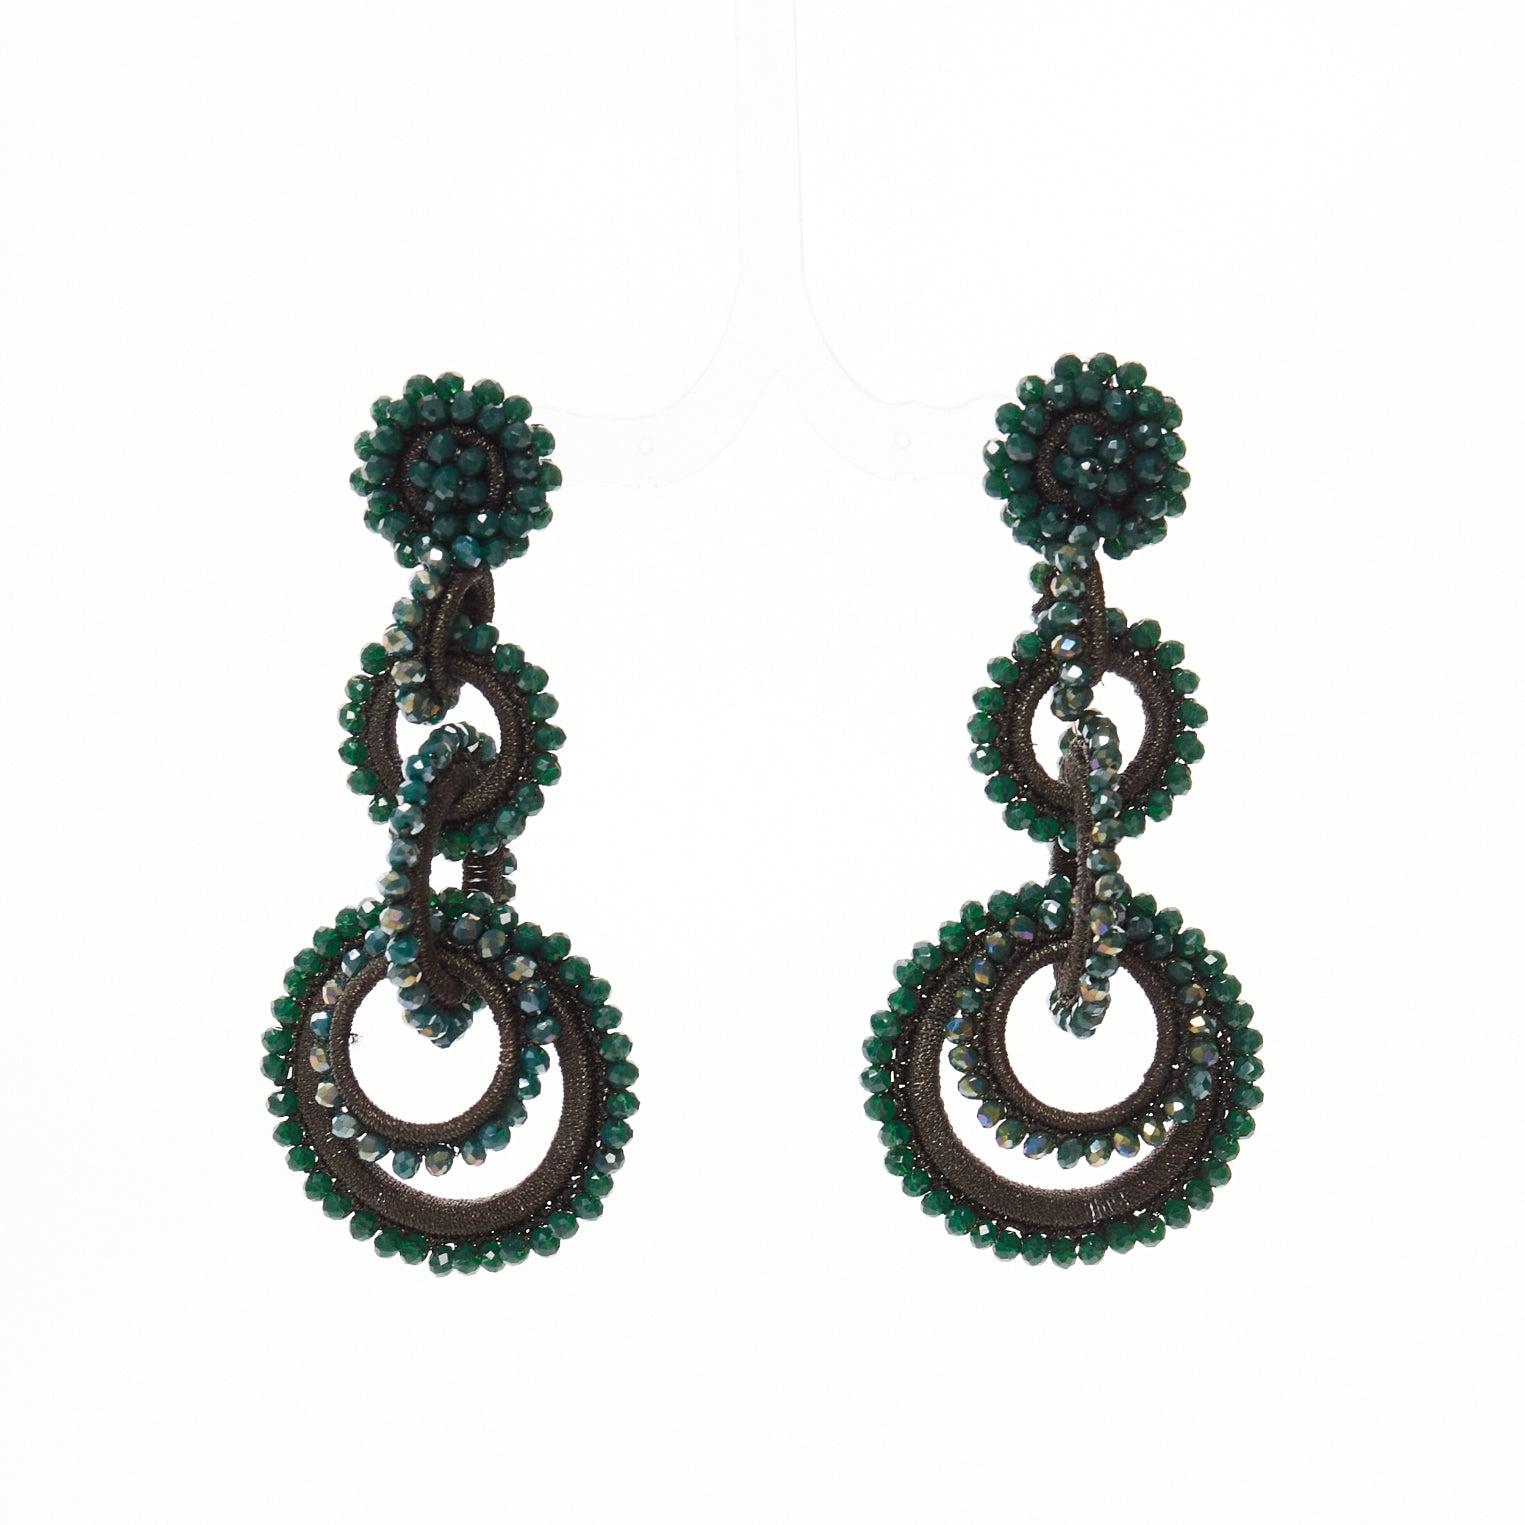 BIBI MARINI moss green beaded fabric multi hoop loop through earrings
Reference: AAWC/A01253
Brand: Bibi Marini
Material: Fabric
Color: Green, Black
Pattern: Solid
Closure: Loop Through
Lining: Silver Metal

CONDITION:
Condition: Very good, this